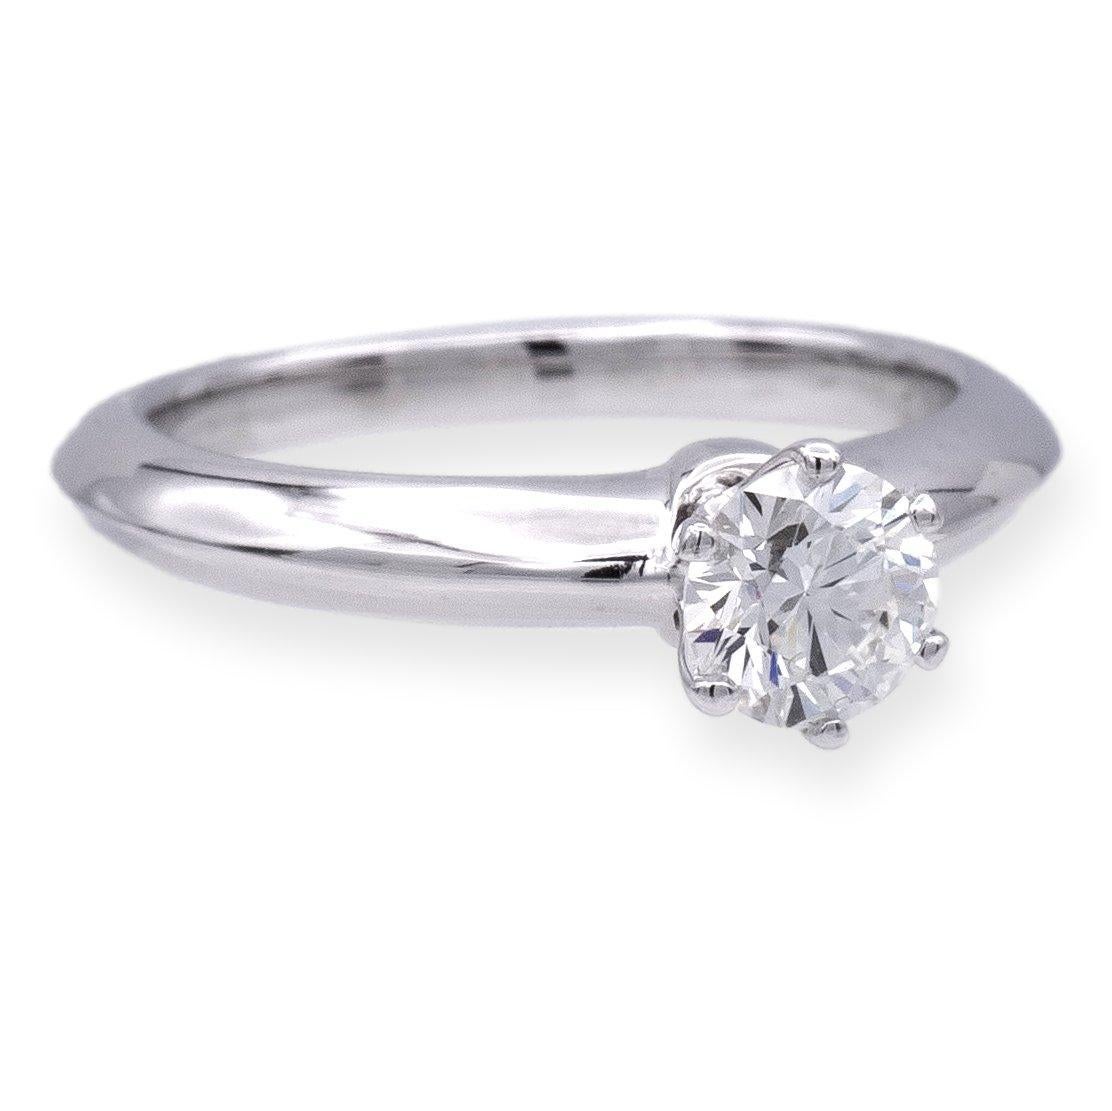 Tiffany & Co Round Brilliant Solitaire featuring a 0.54 ct Center I color VVS1 clarity diamond finely crafted in a 6 prong Platinum Mounting. Fully hallmarked with logo, serial numbers and metal content.

Ring Specifications
Brand: Tiffany &